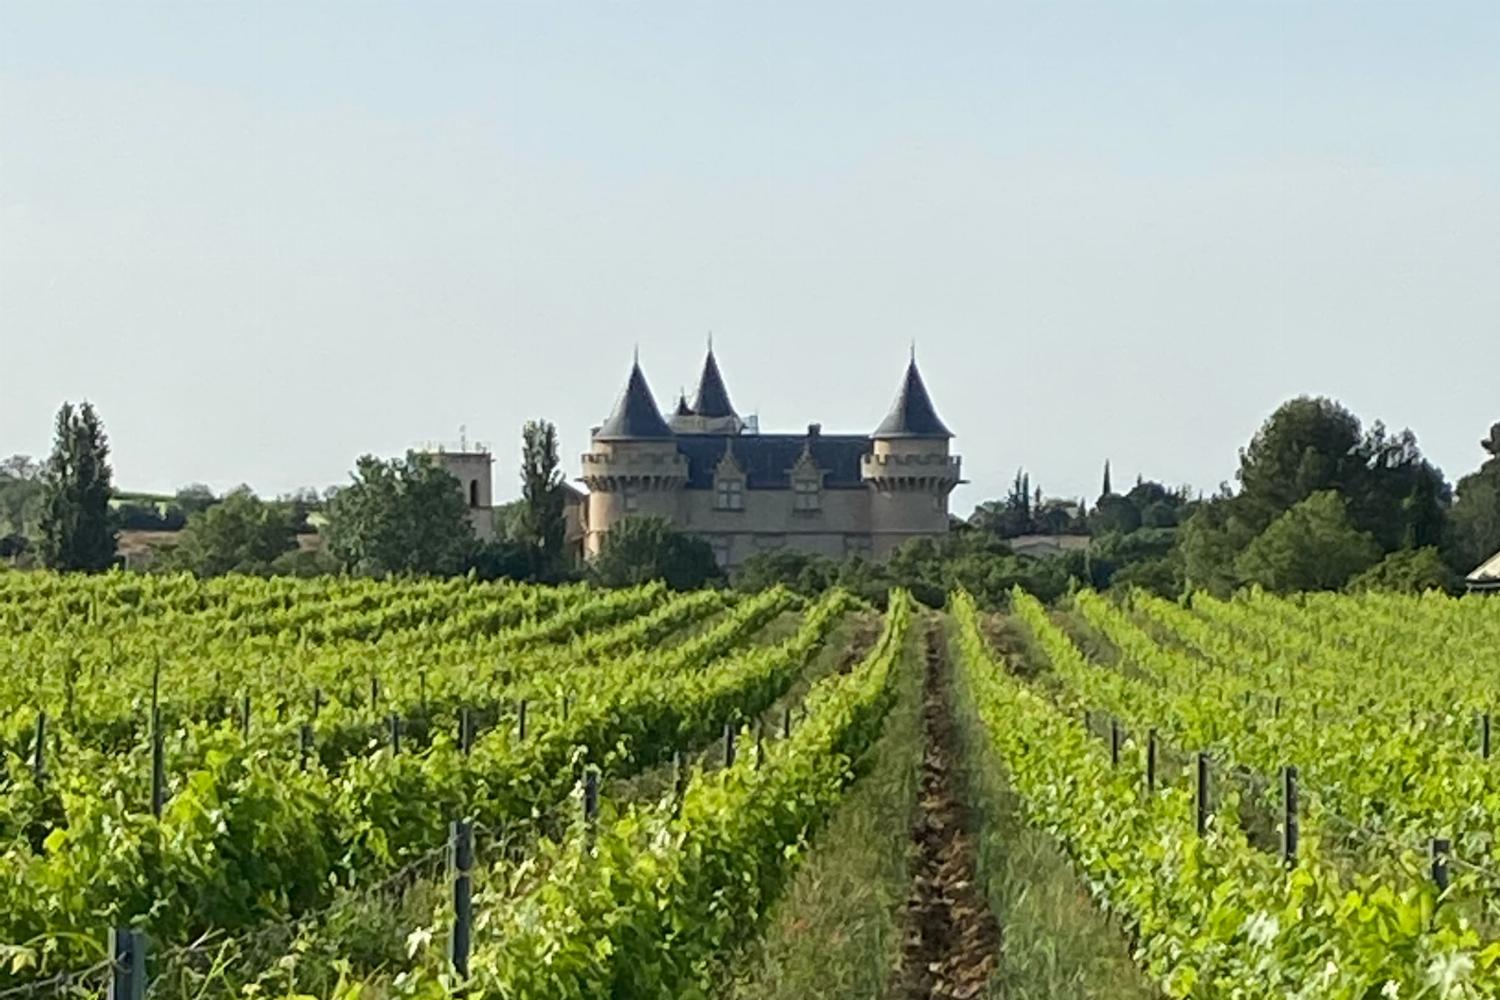 Château in the village